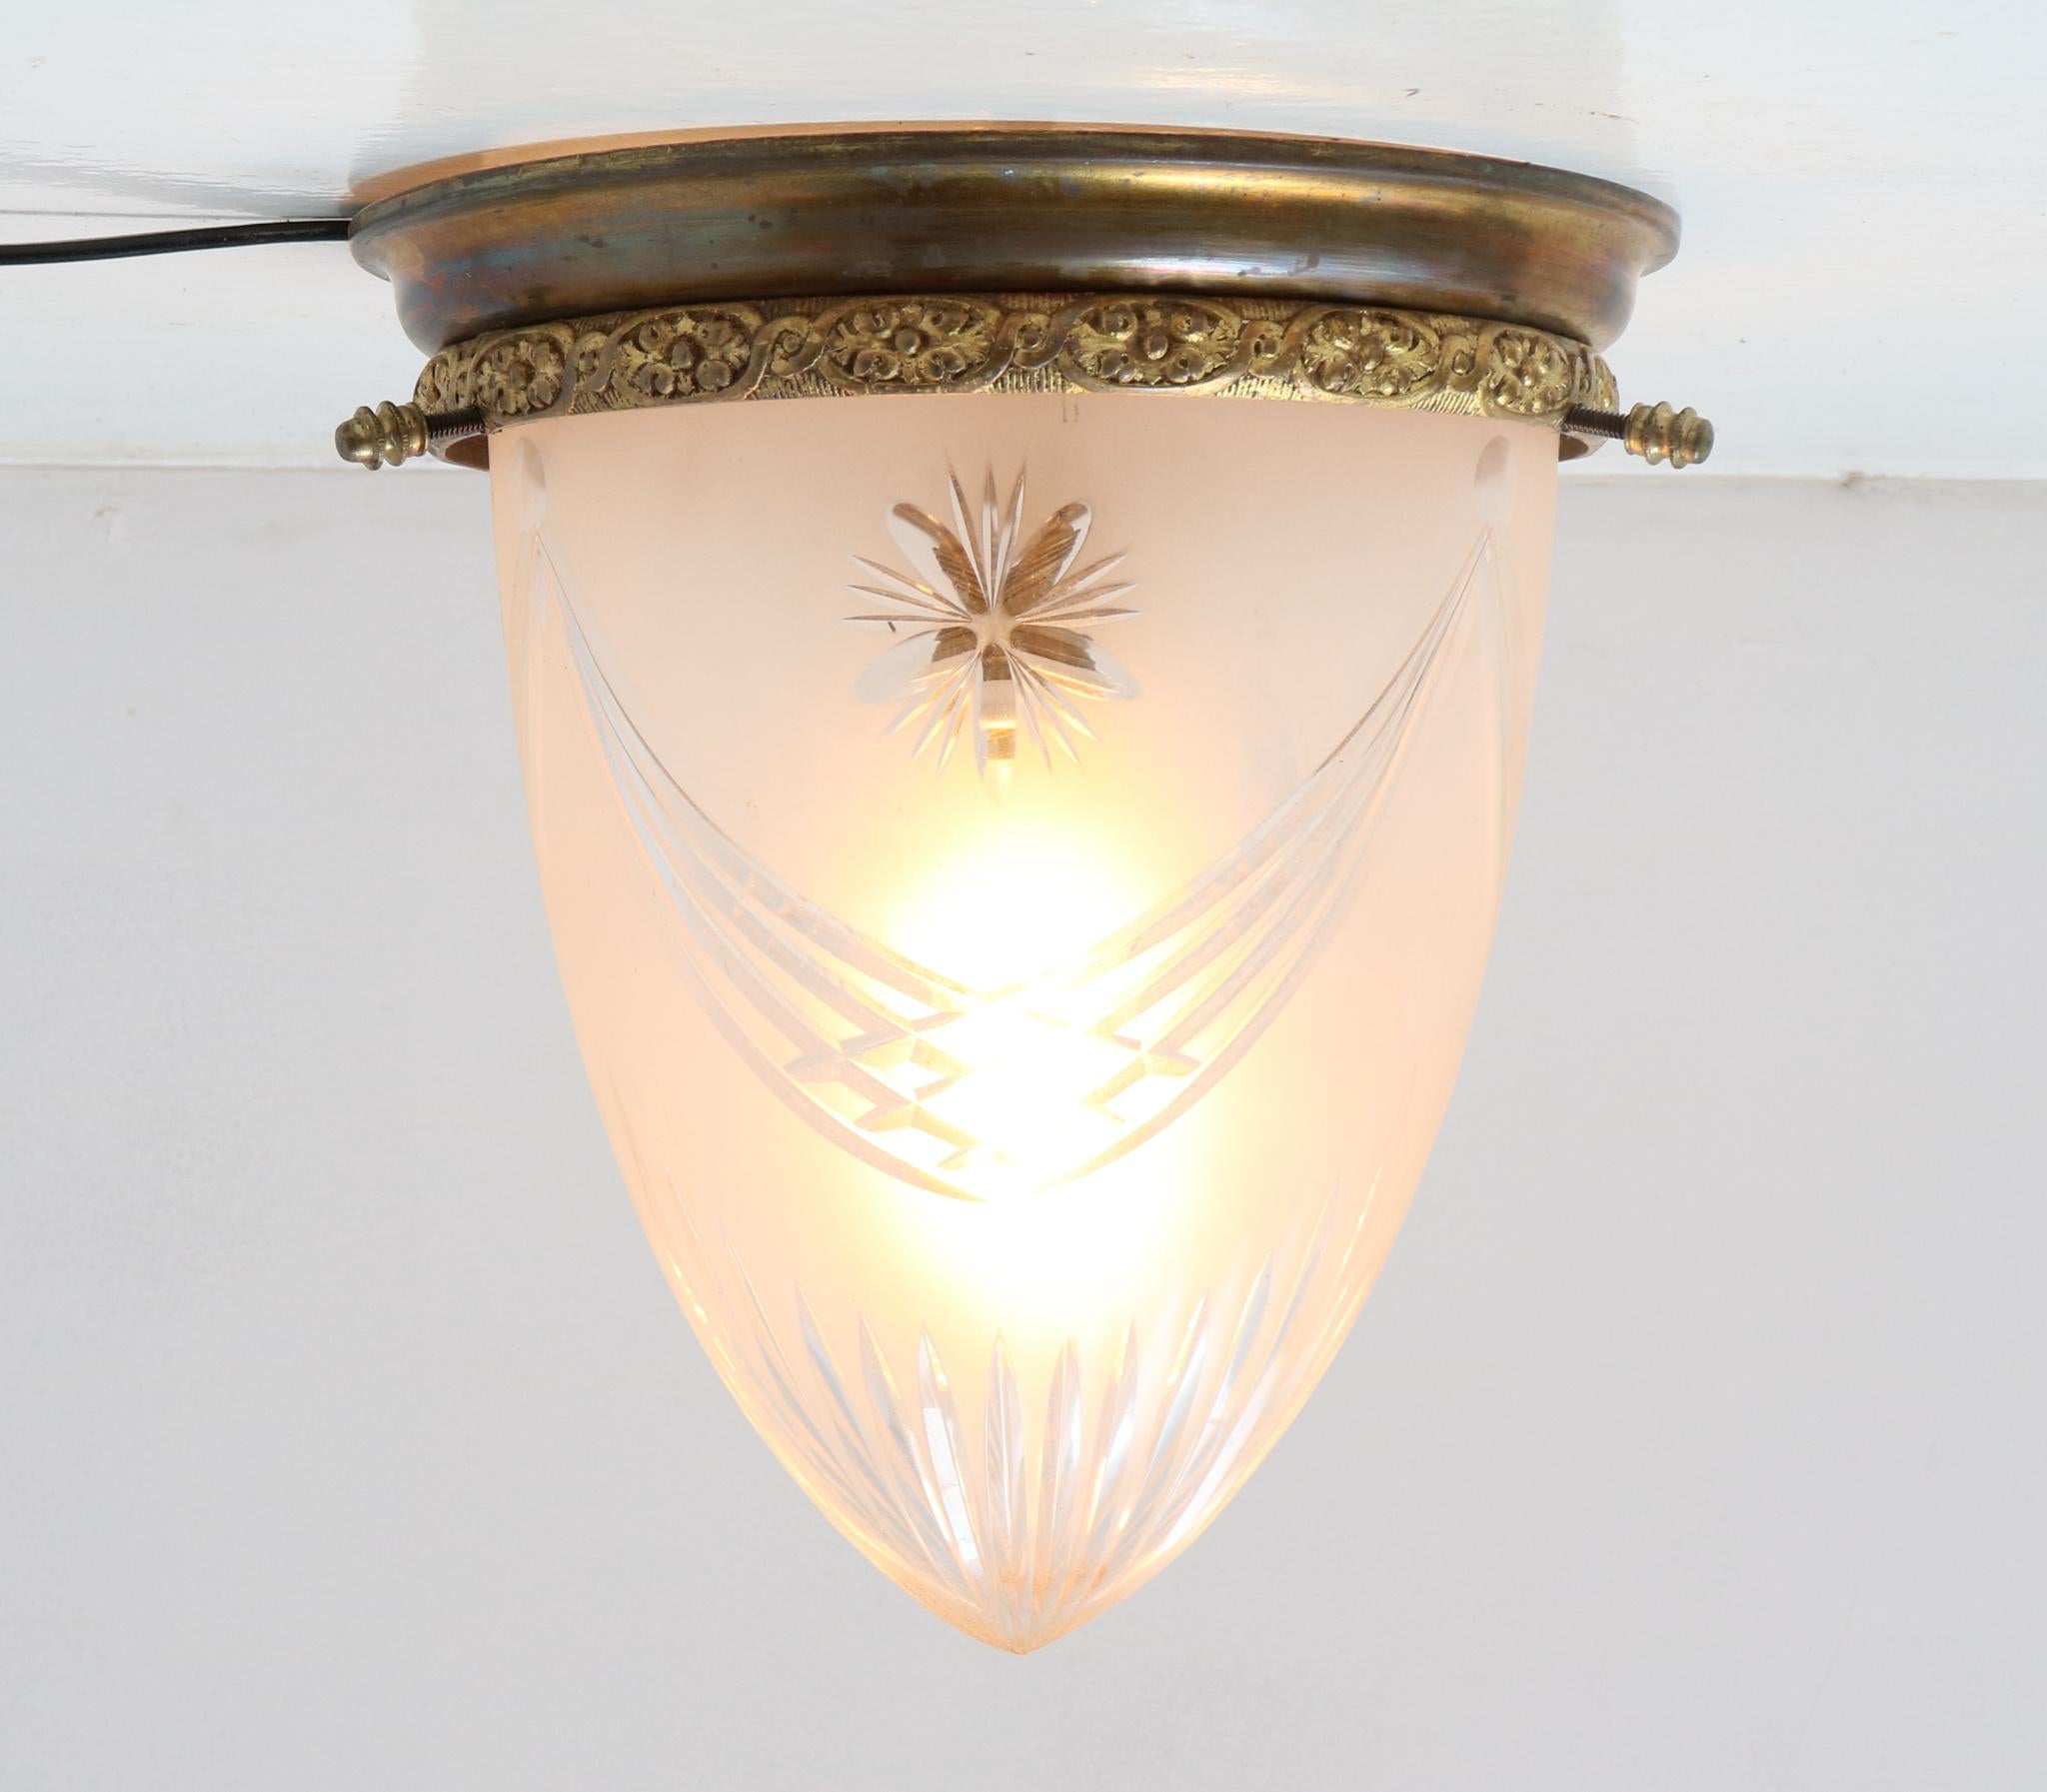 Early 20th Century Patinated Bronze French Art Nouveau Cut Blown Glass Flush Mount Ceiling Light